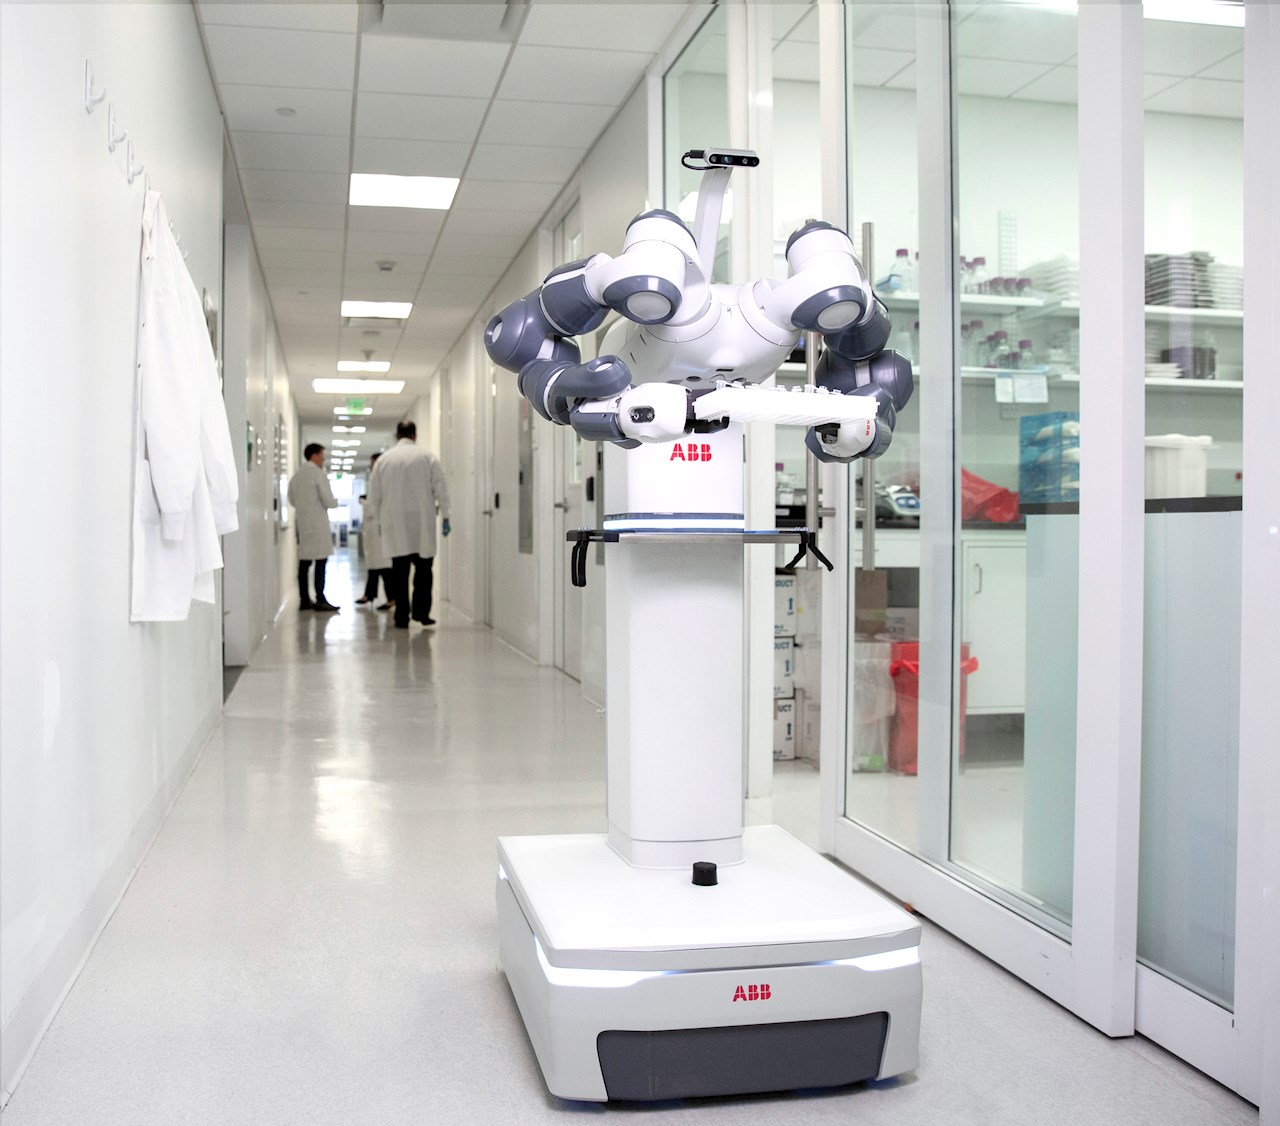 ABB_will_integrate_Sevensenses_AI_and_mapping_technology_into_its_AMR_portfolio_enabling_its_mobile_robots_to_safely_navigate_in_dynamic_environments_1.jpg